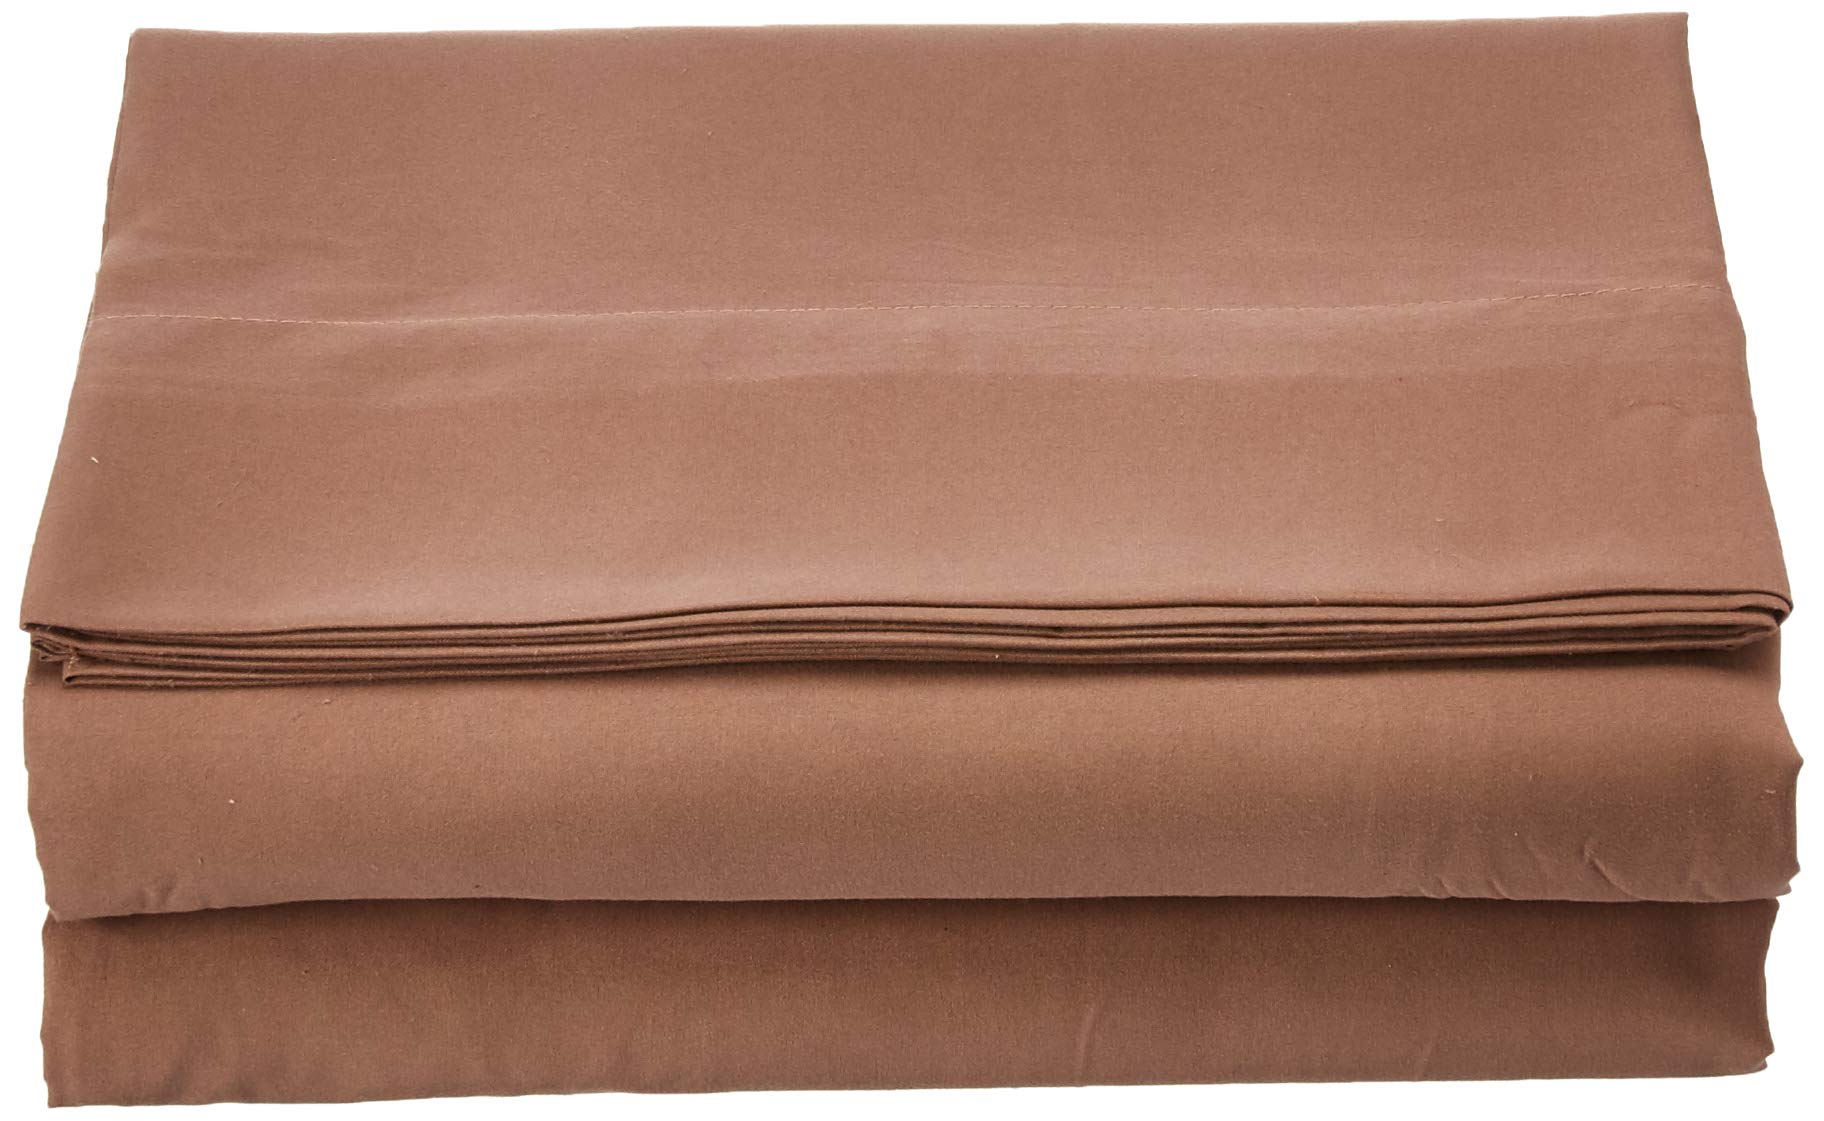 Book Cover Luxury Flat Sheet on Amazon Elegant Comfort Wrinkle-Free 1500 Thread Count Egyptian Quality 1-Piece Flat Sheet, King Size, Taupe King Taupe